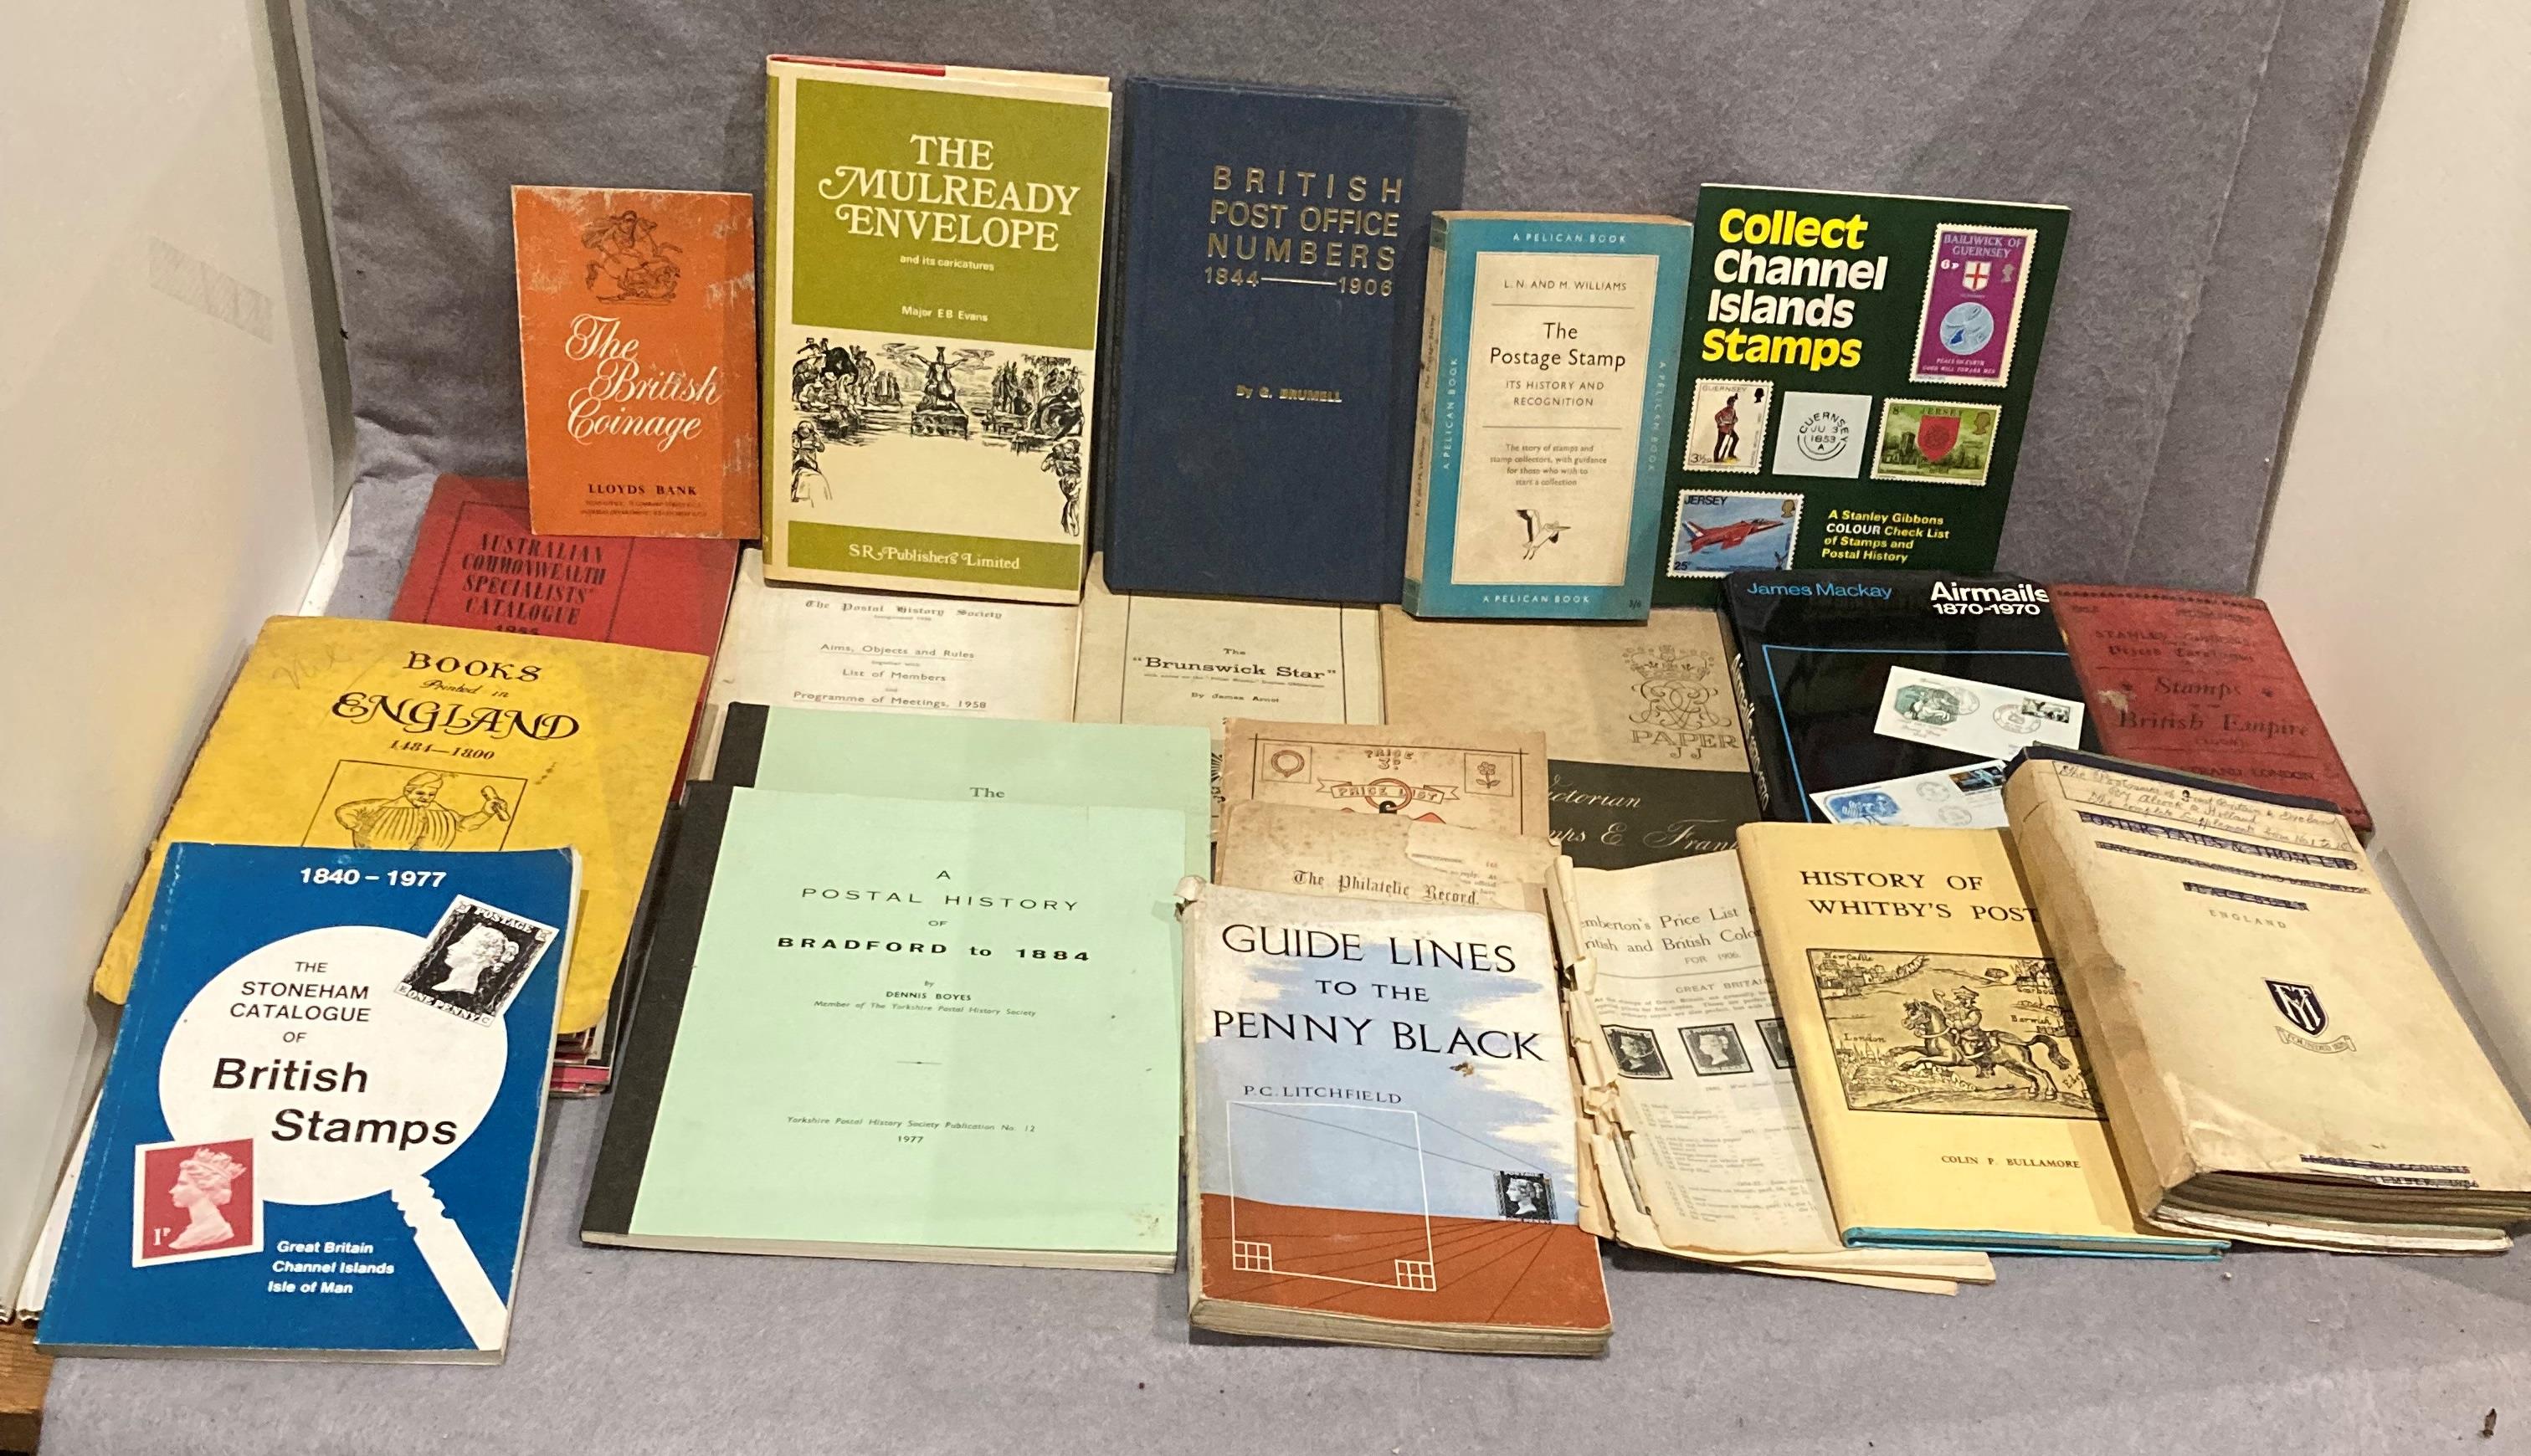 Stamp and philatelic related - twenty books and booklets and some loose sheets including Dennis